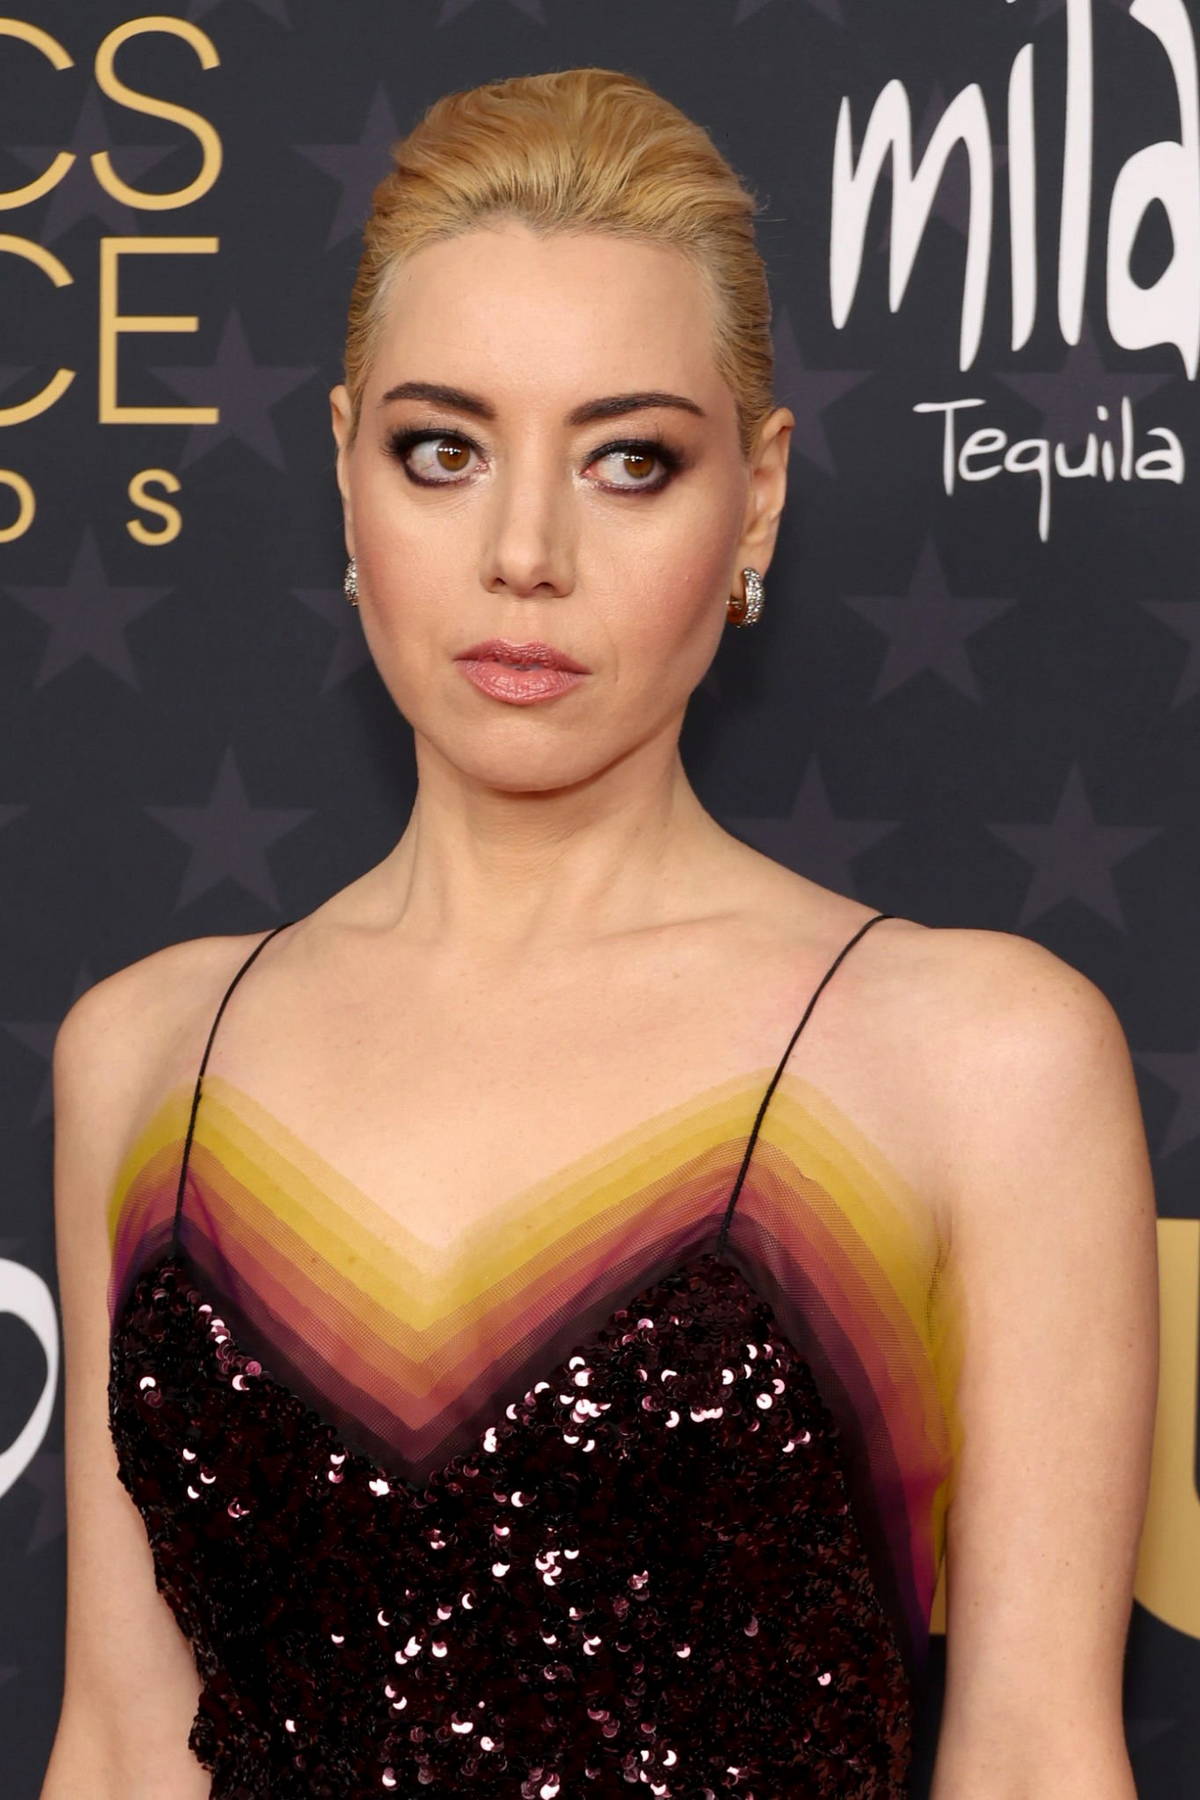 Photo: Aubrey Plaza Attends the Critics' Choice Awards in Los Angeles -  LAP20230115523 